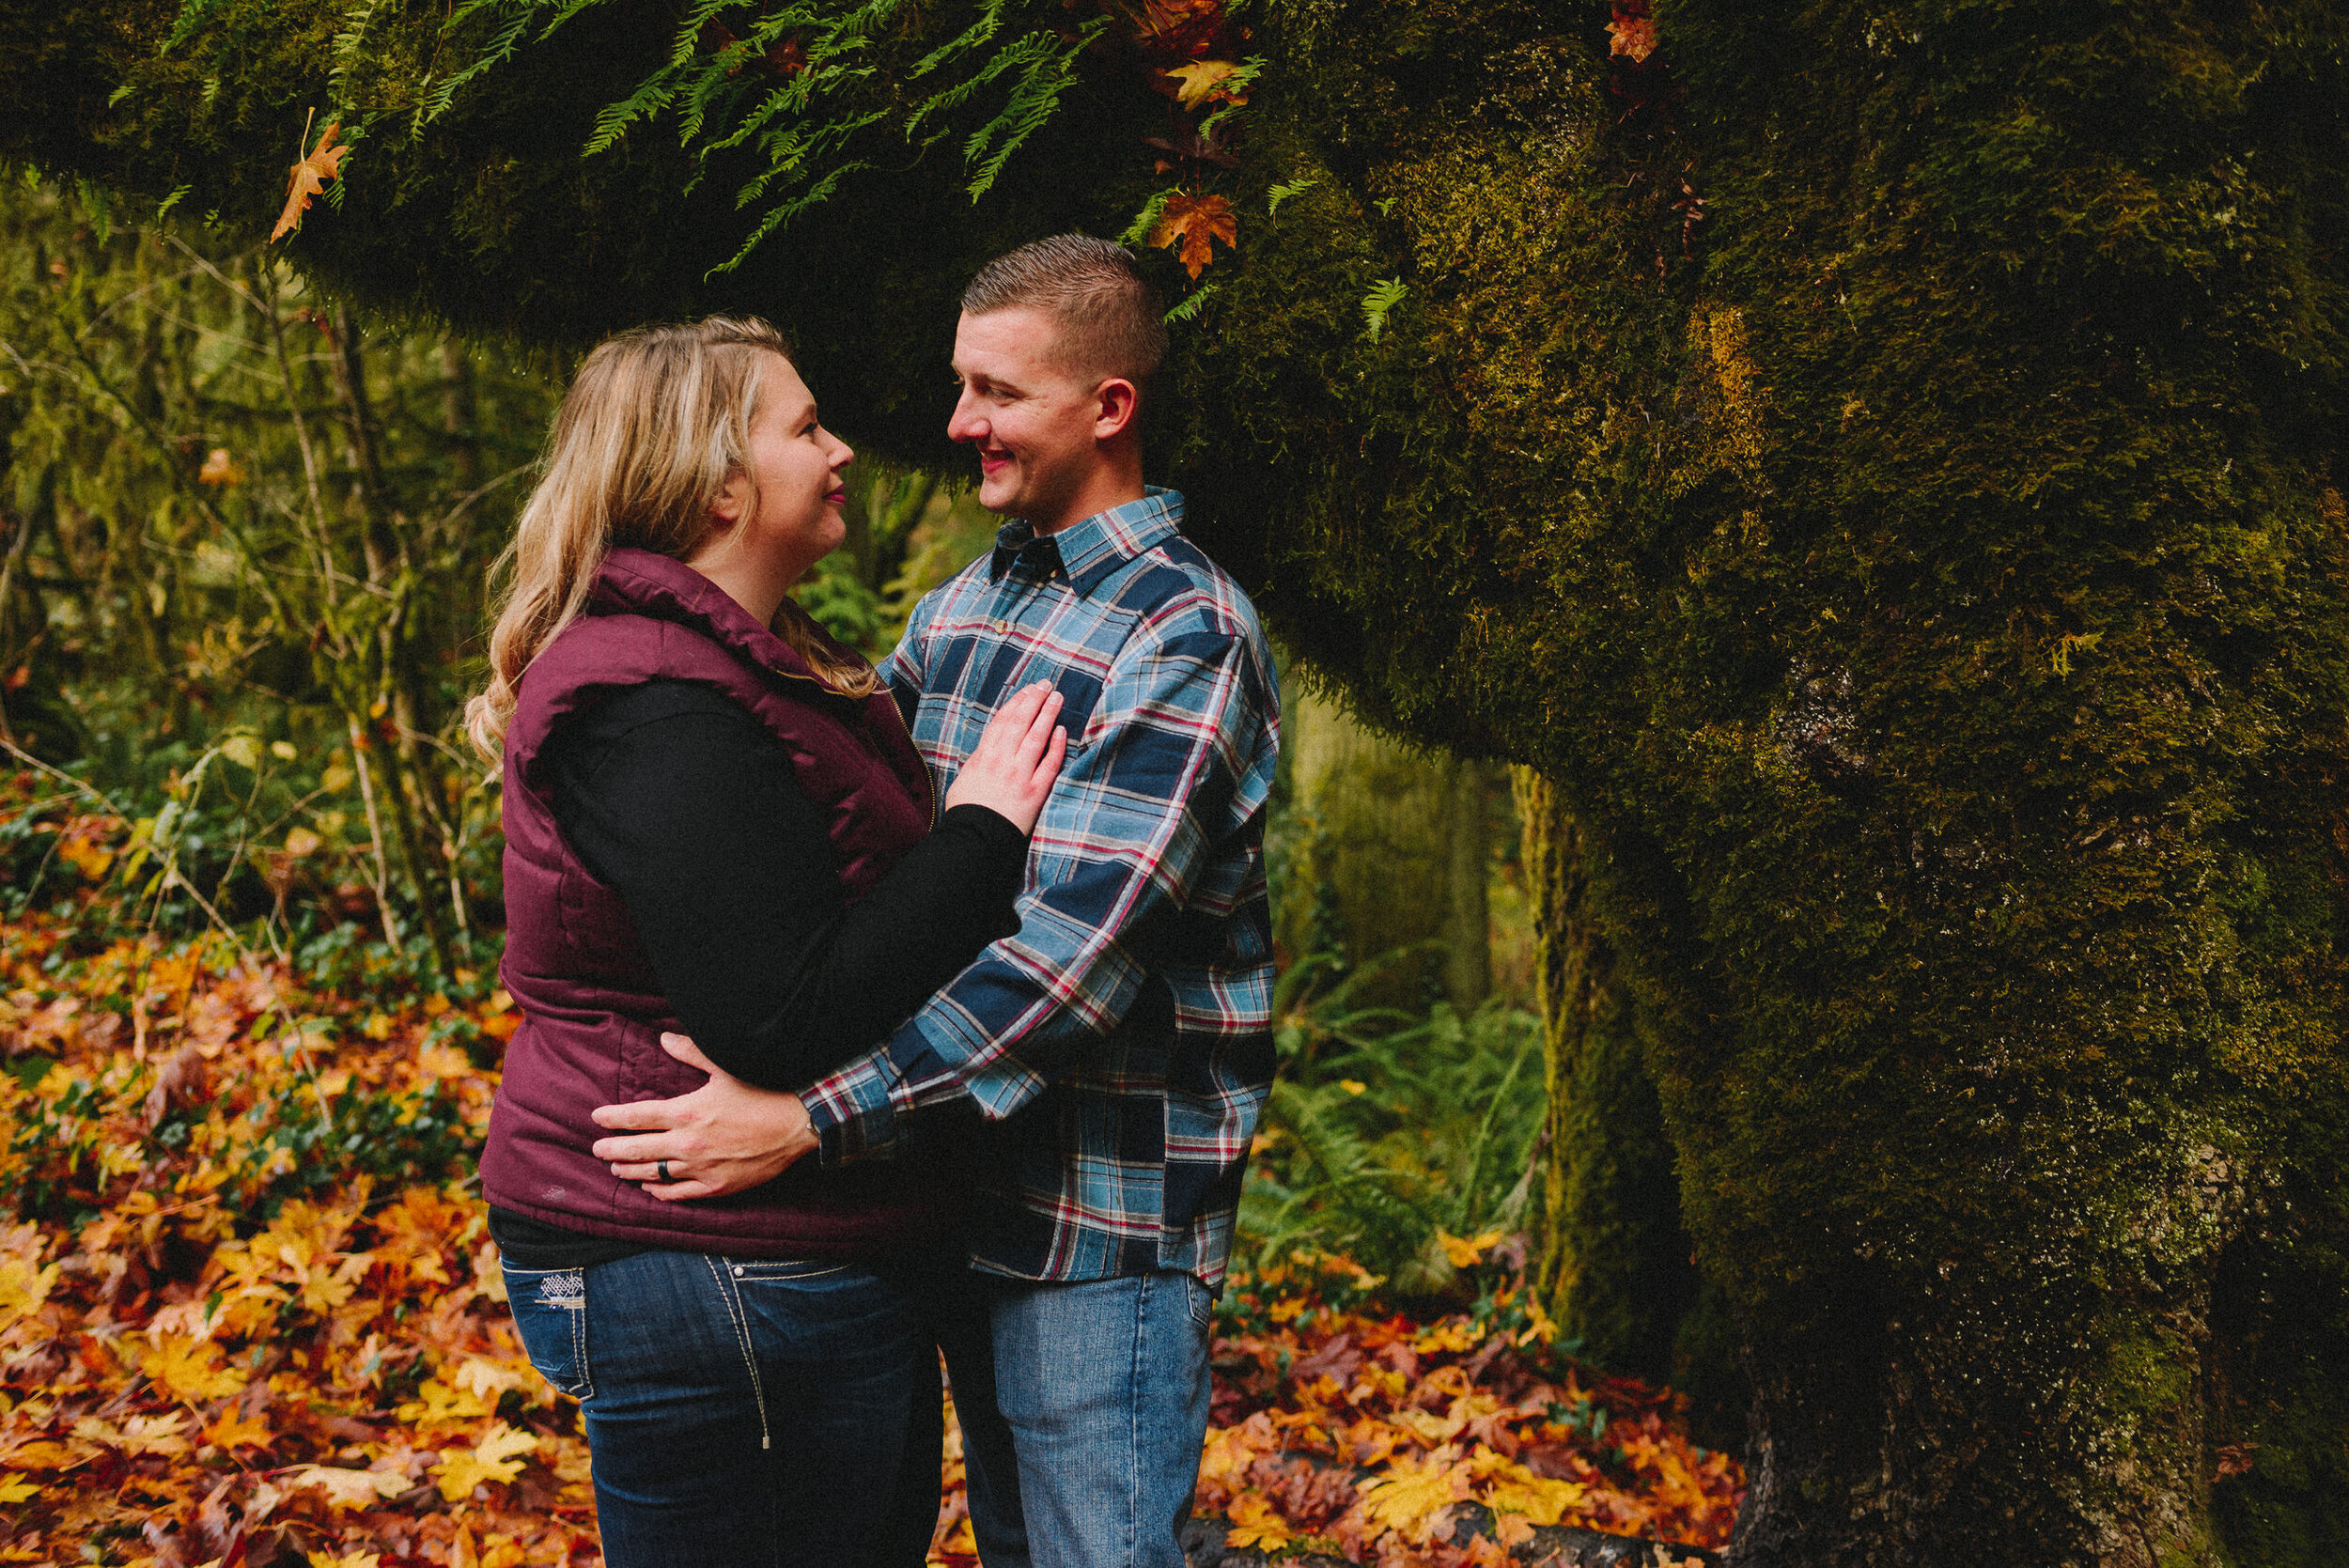 priest-point-park-couples-session-olympia-washington-way-up-north-photography (125).jpg